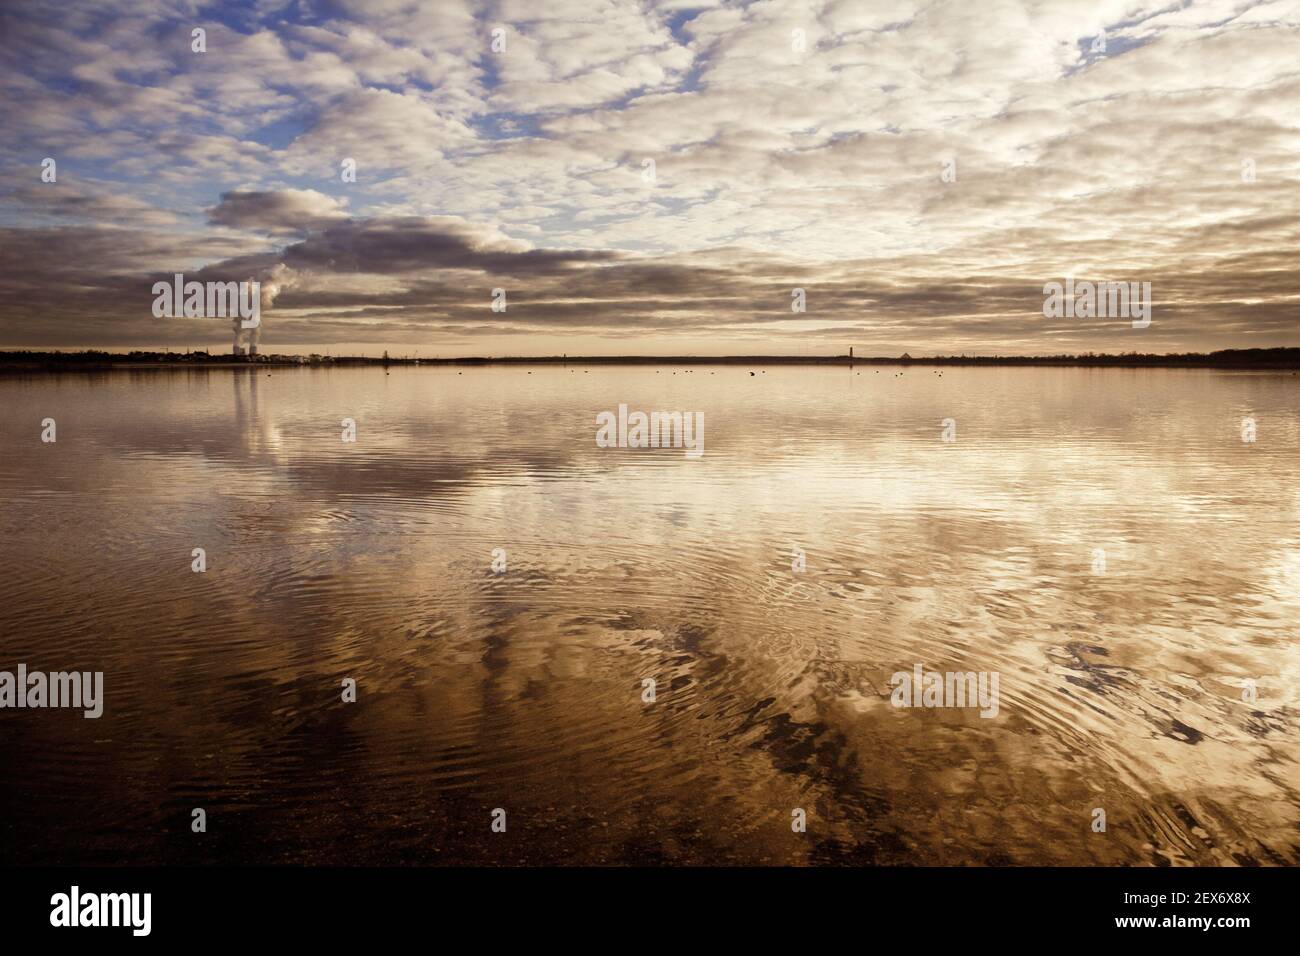 Lake Cospuden in the evening Stock Photo